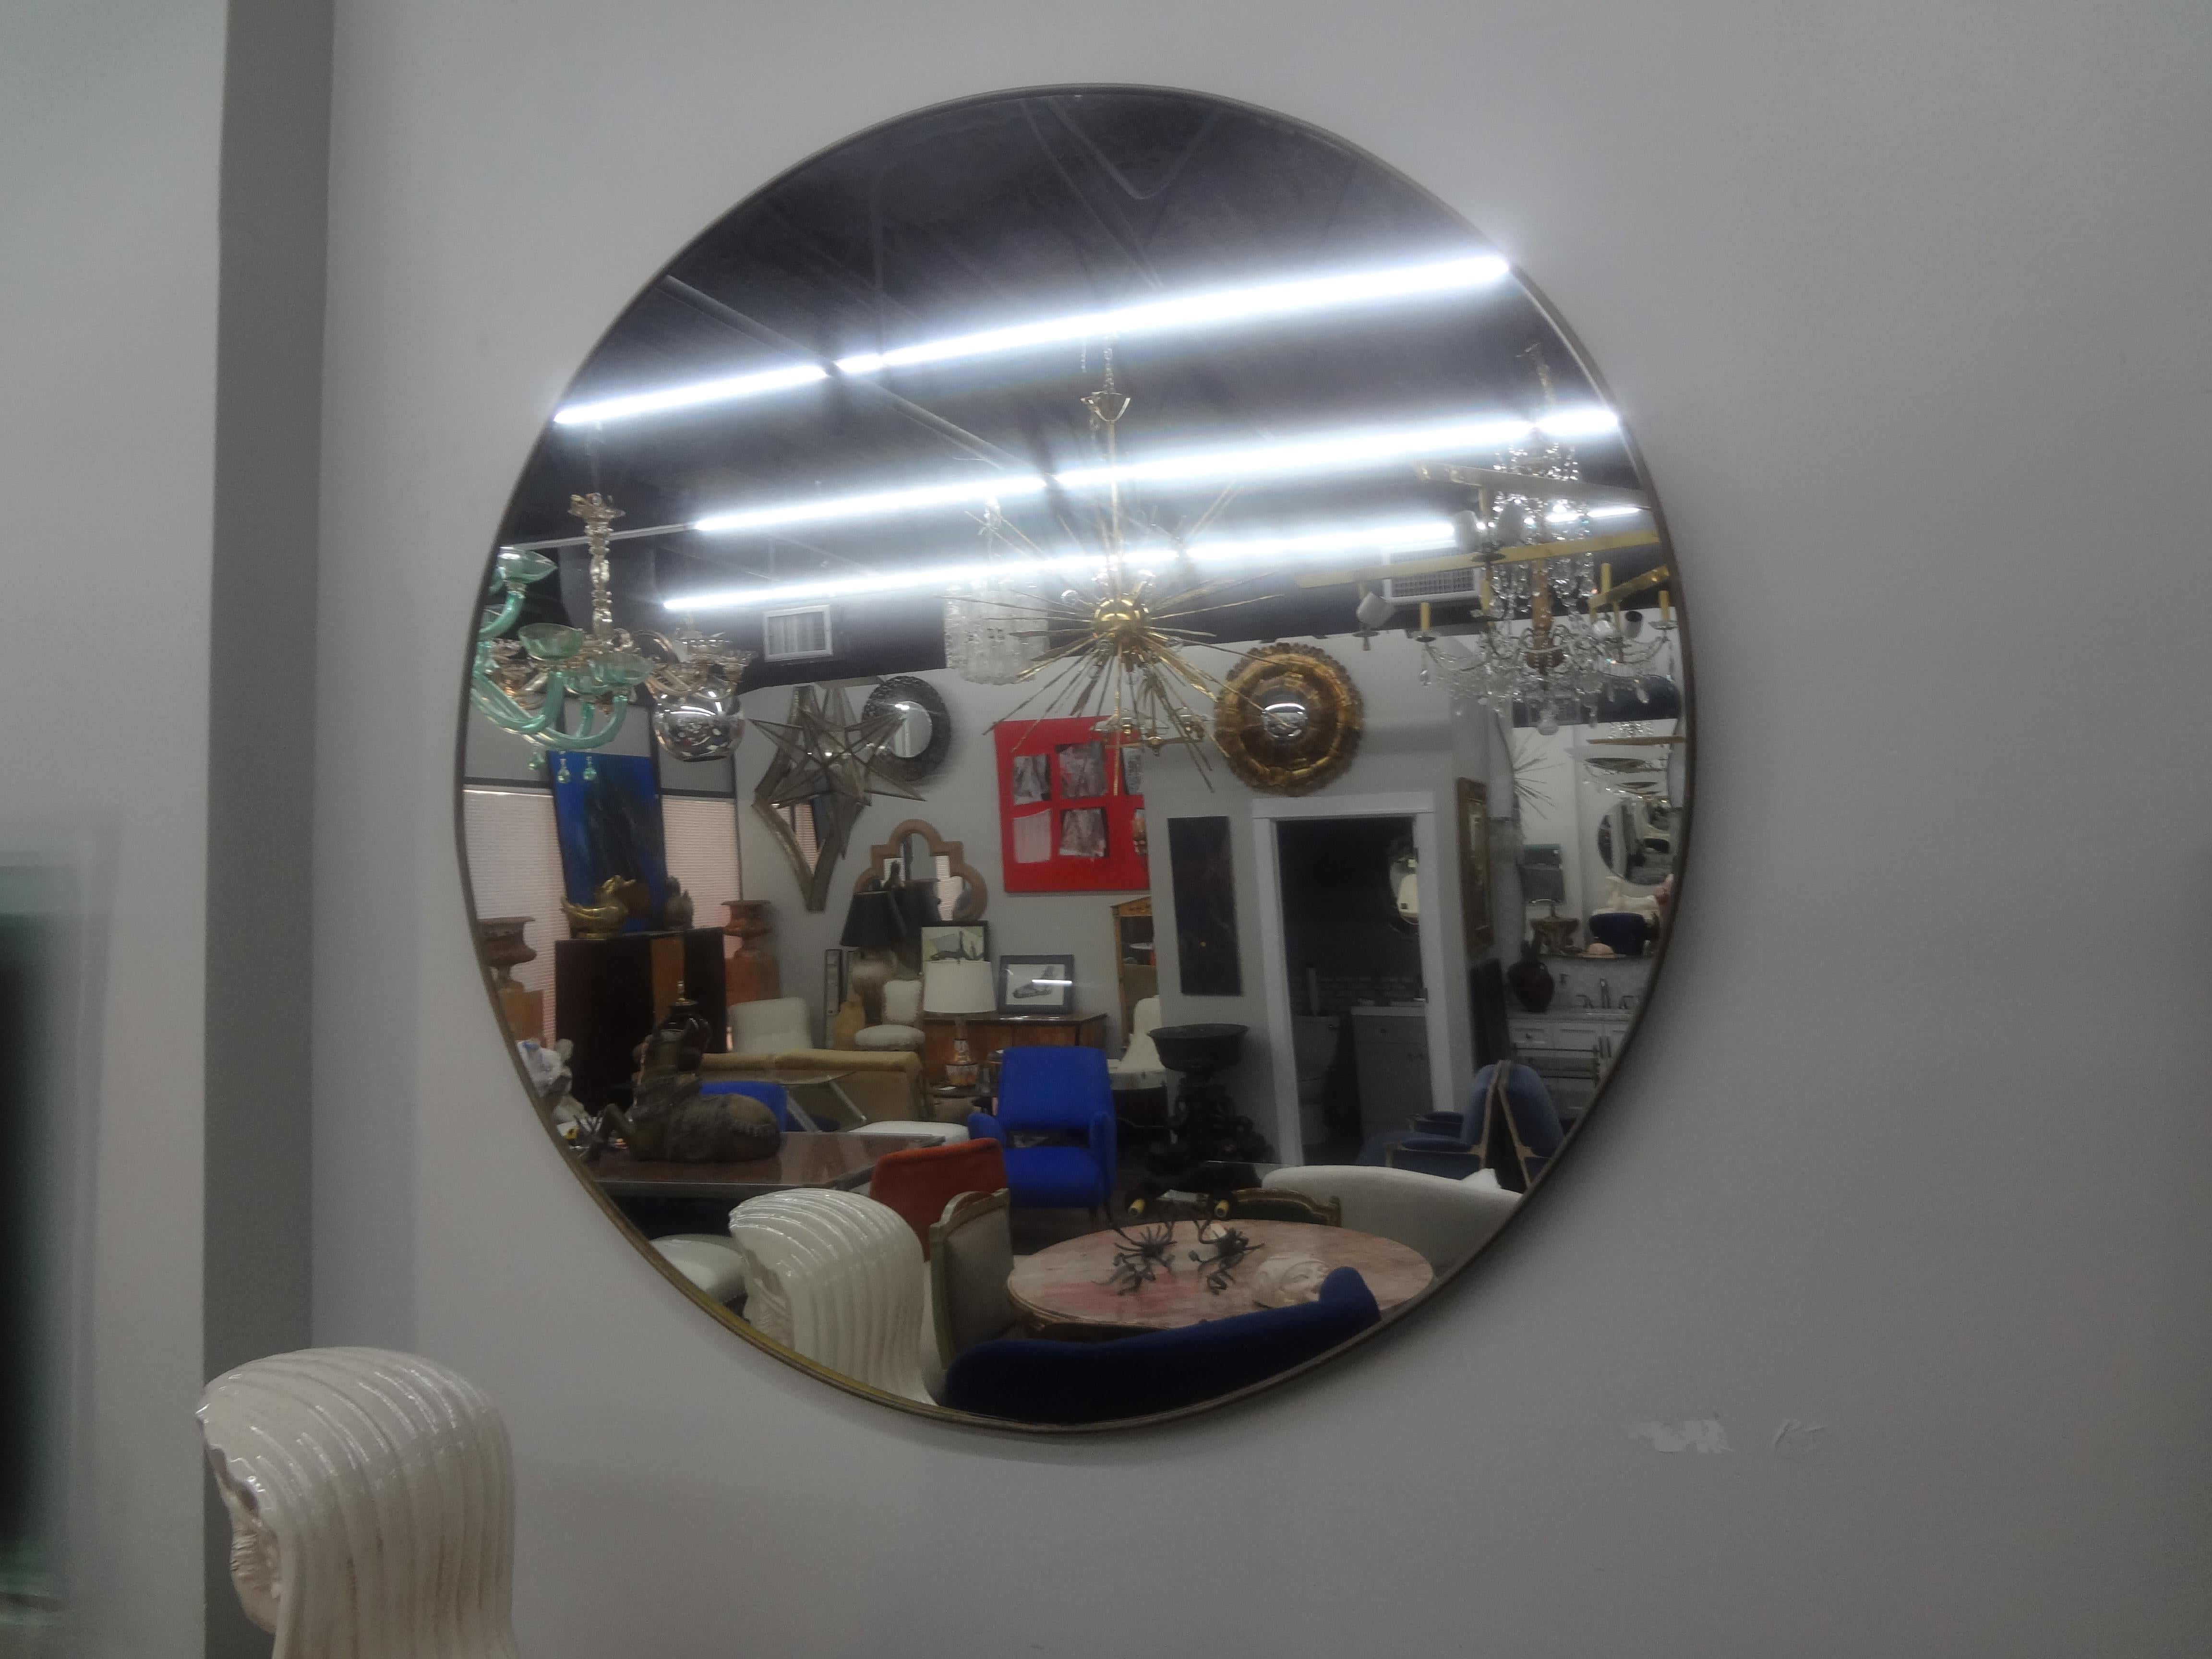 Pair Of Italian Gio Ponti Inspired Brass Mirrors.
Matching pair of Italian modernist brass or bronze mirrors have gorgeous patina and date to the 1960s. Our stunning Hollywood Regency round brass mirrors would look great over console tables,